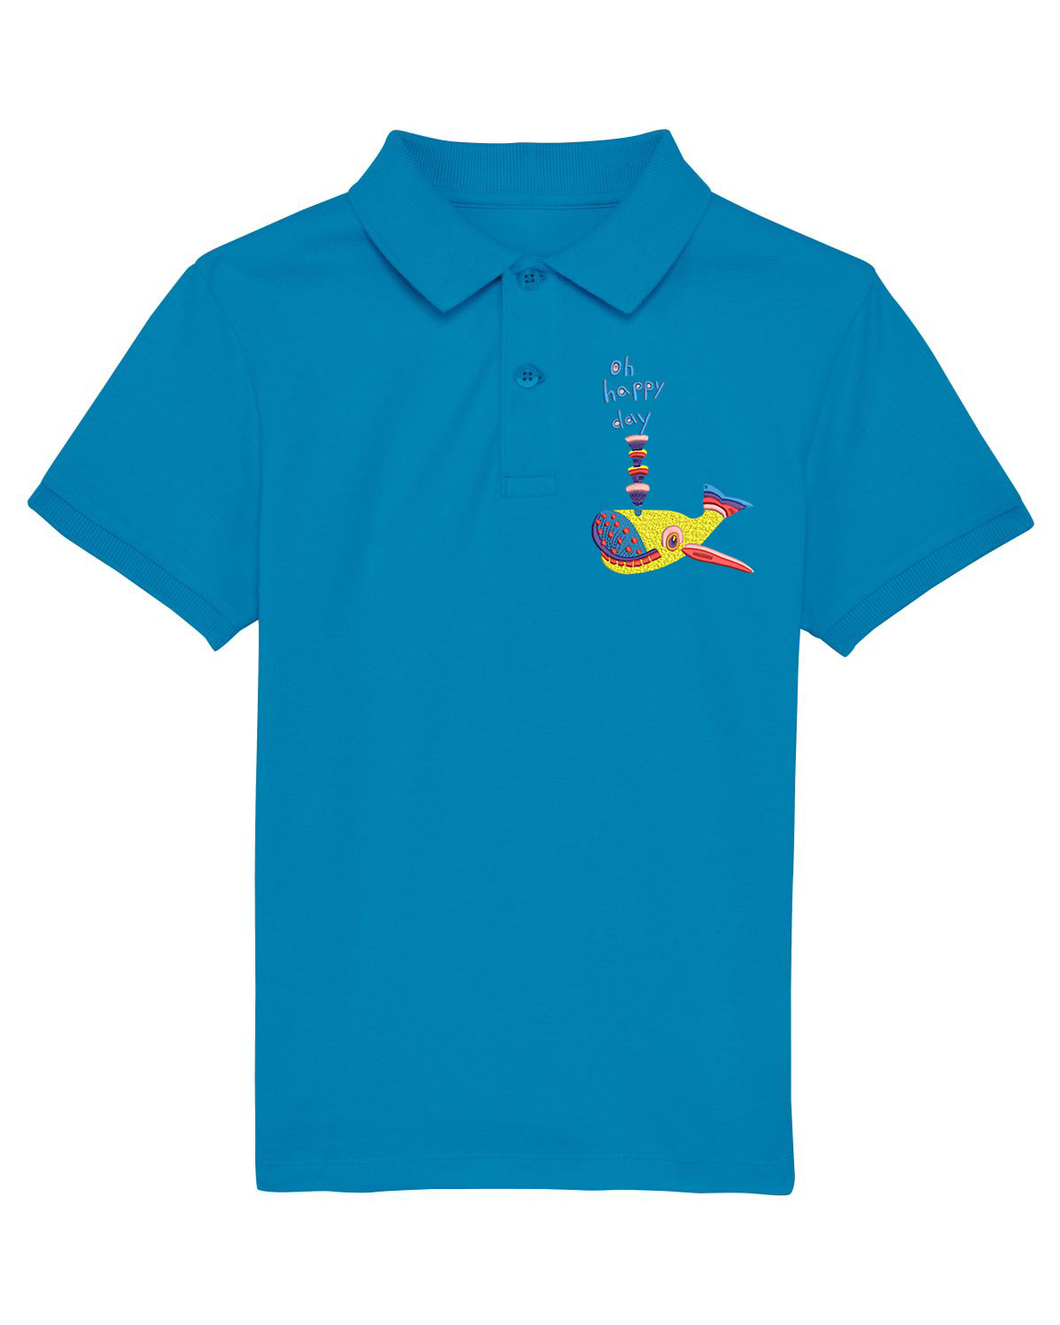 Oh happy day! 🐳 - Embroidered kids mini polo tshirt